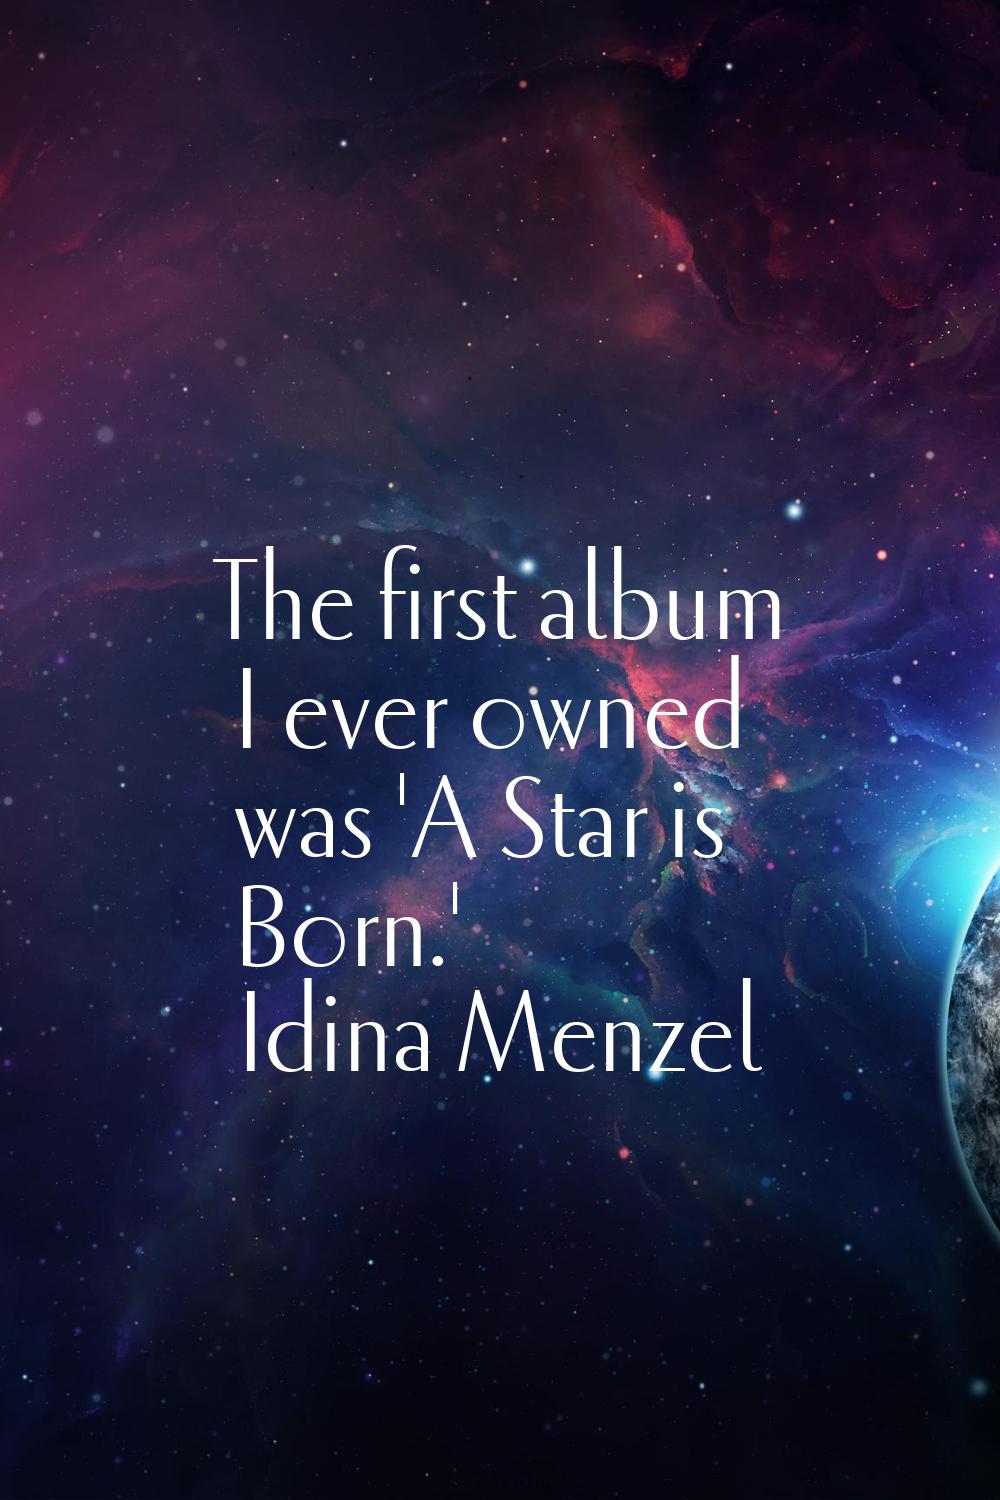 The first album I ever owned was 'A Star is Born.'